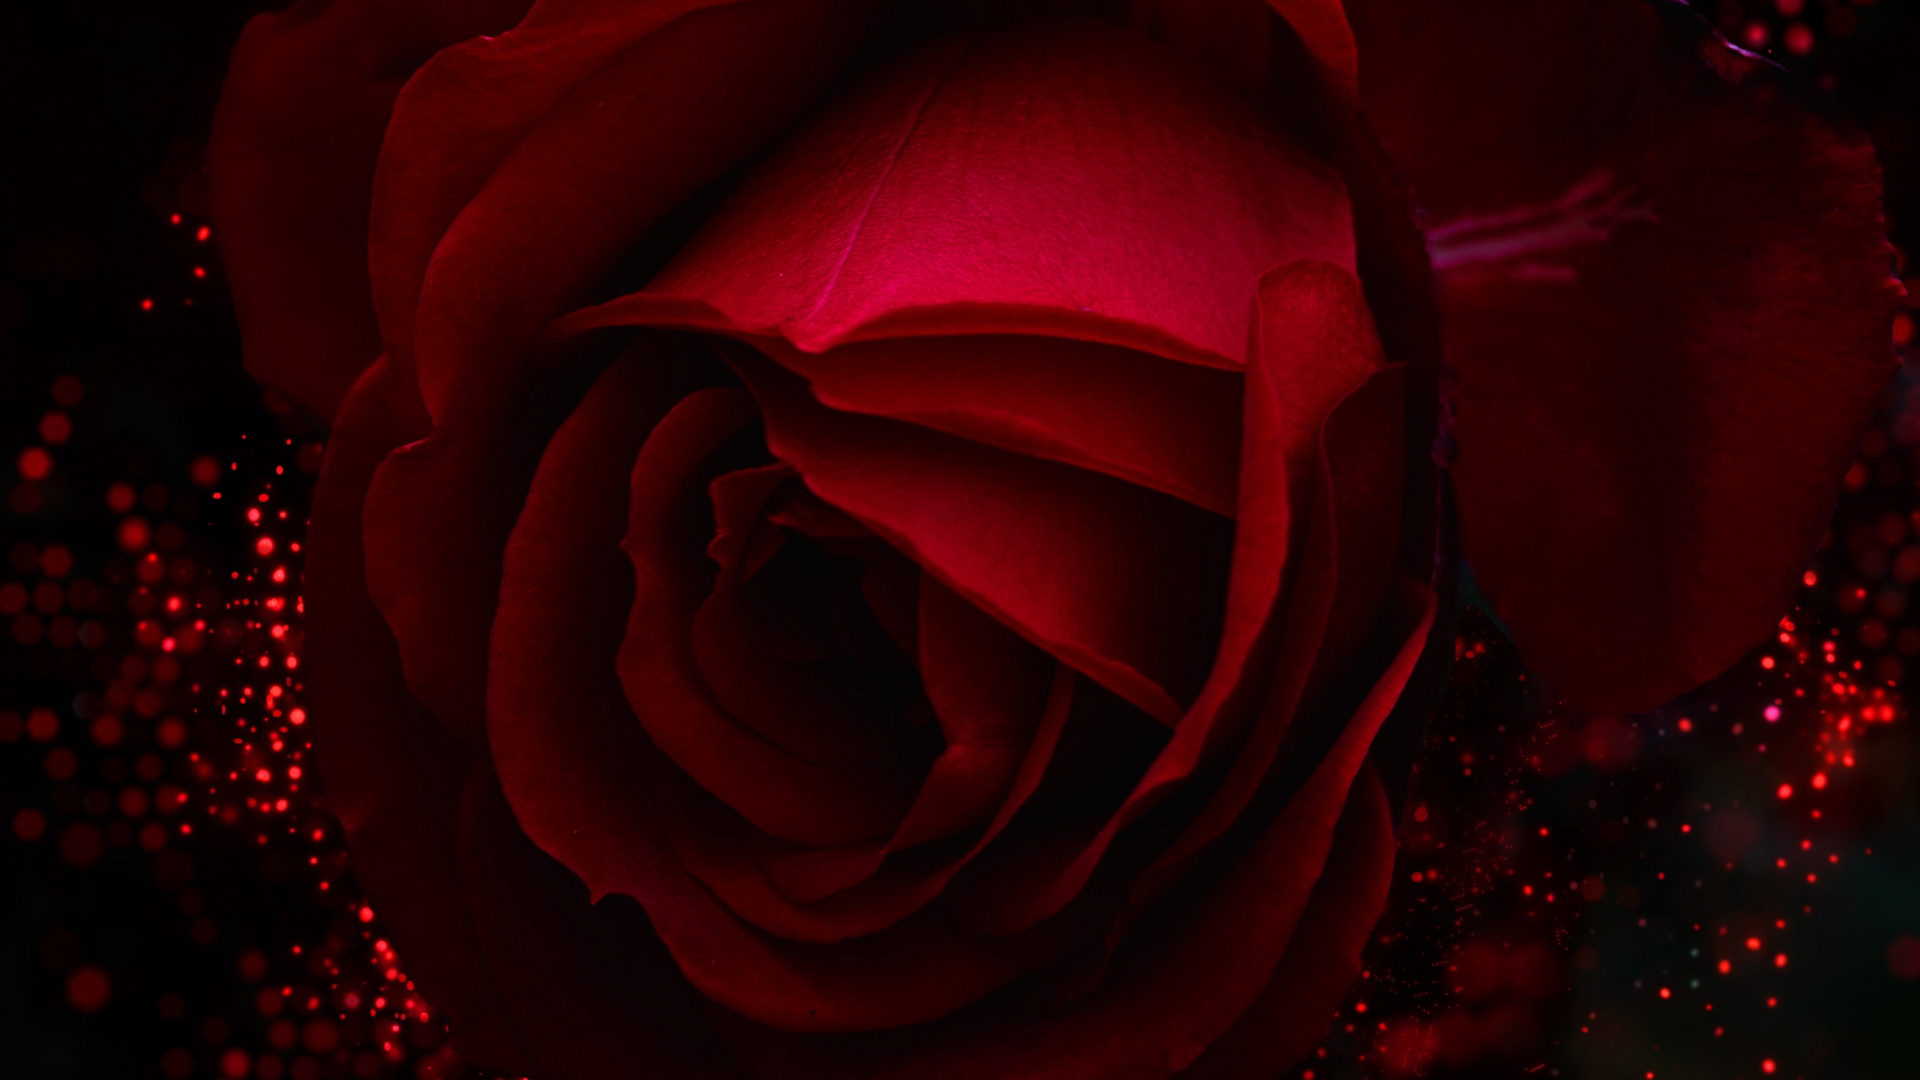 Red Rose With Water Droplets. Wallpaper in 1920x1080 Resolution